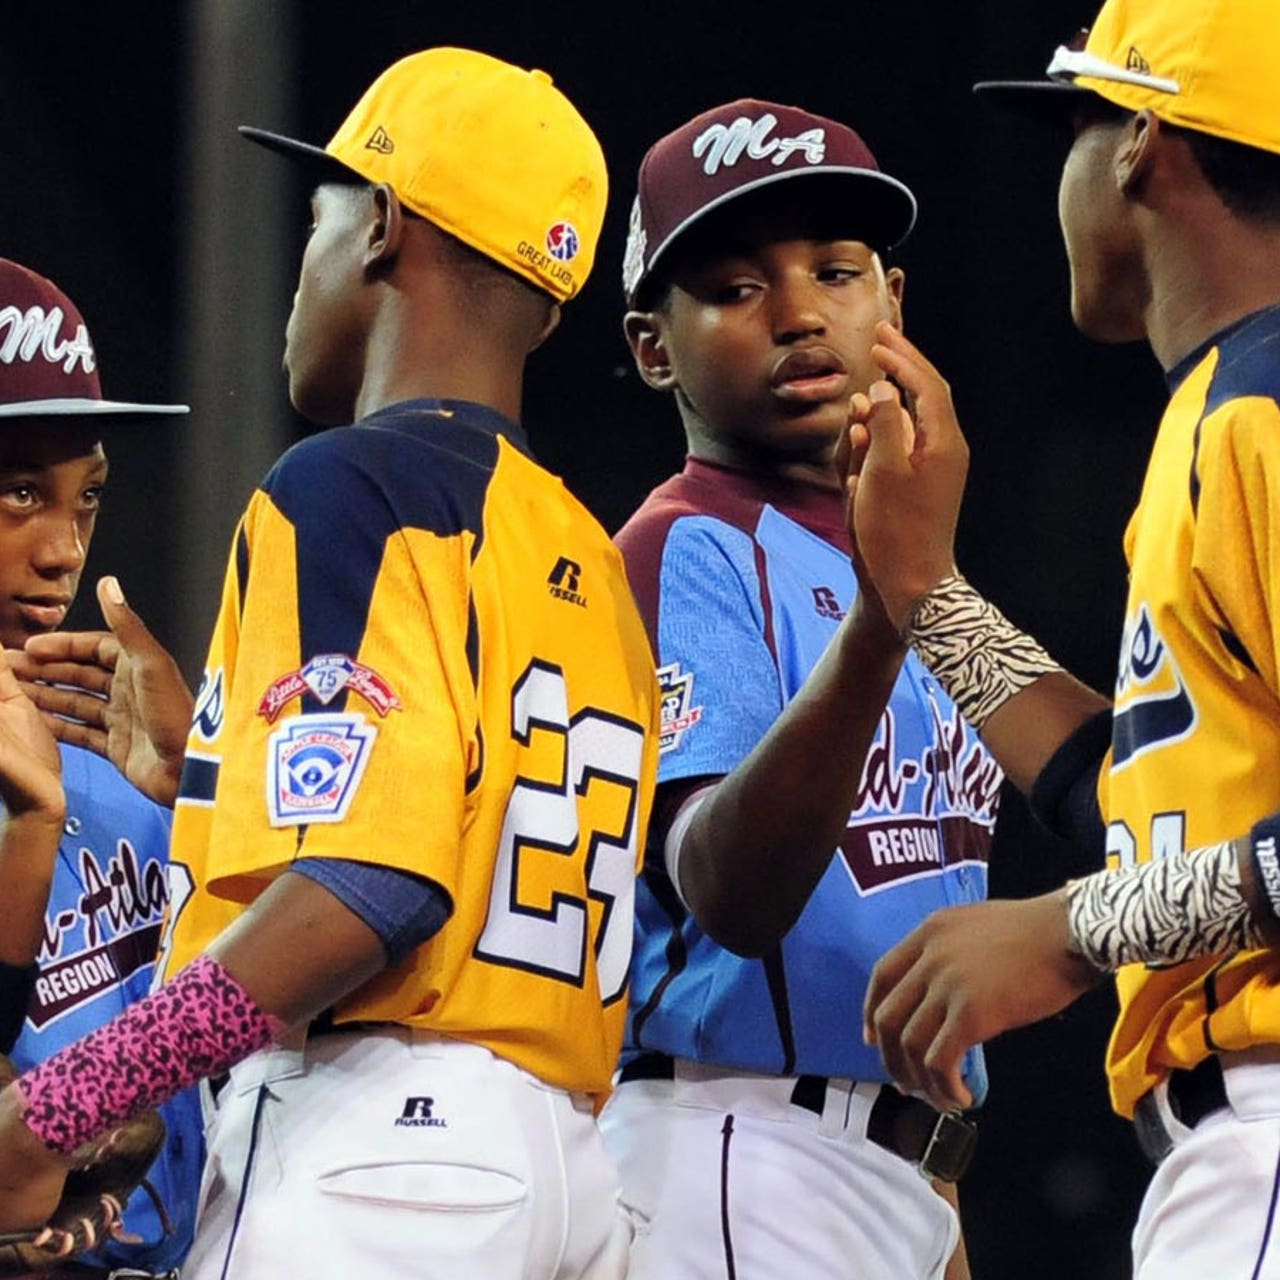 Mo'ne Davis, Philly ousted in LLWS by Chicago's Jackie Robinson